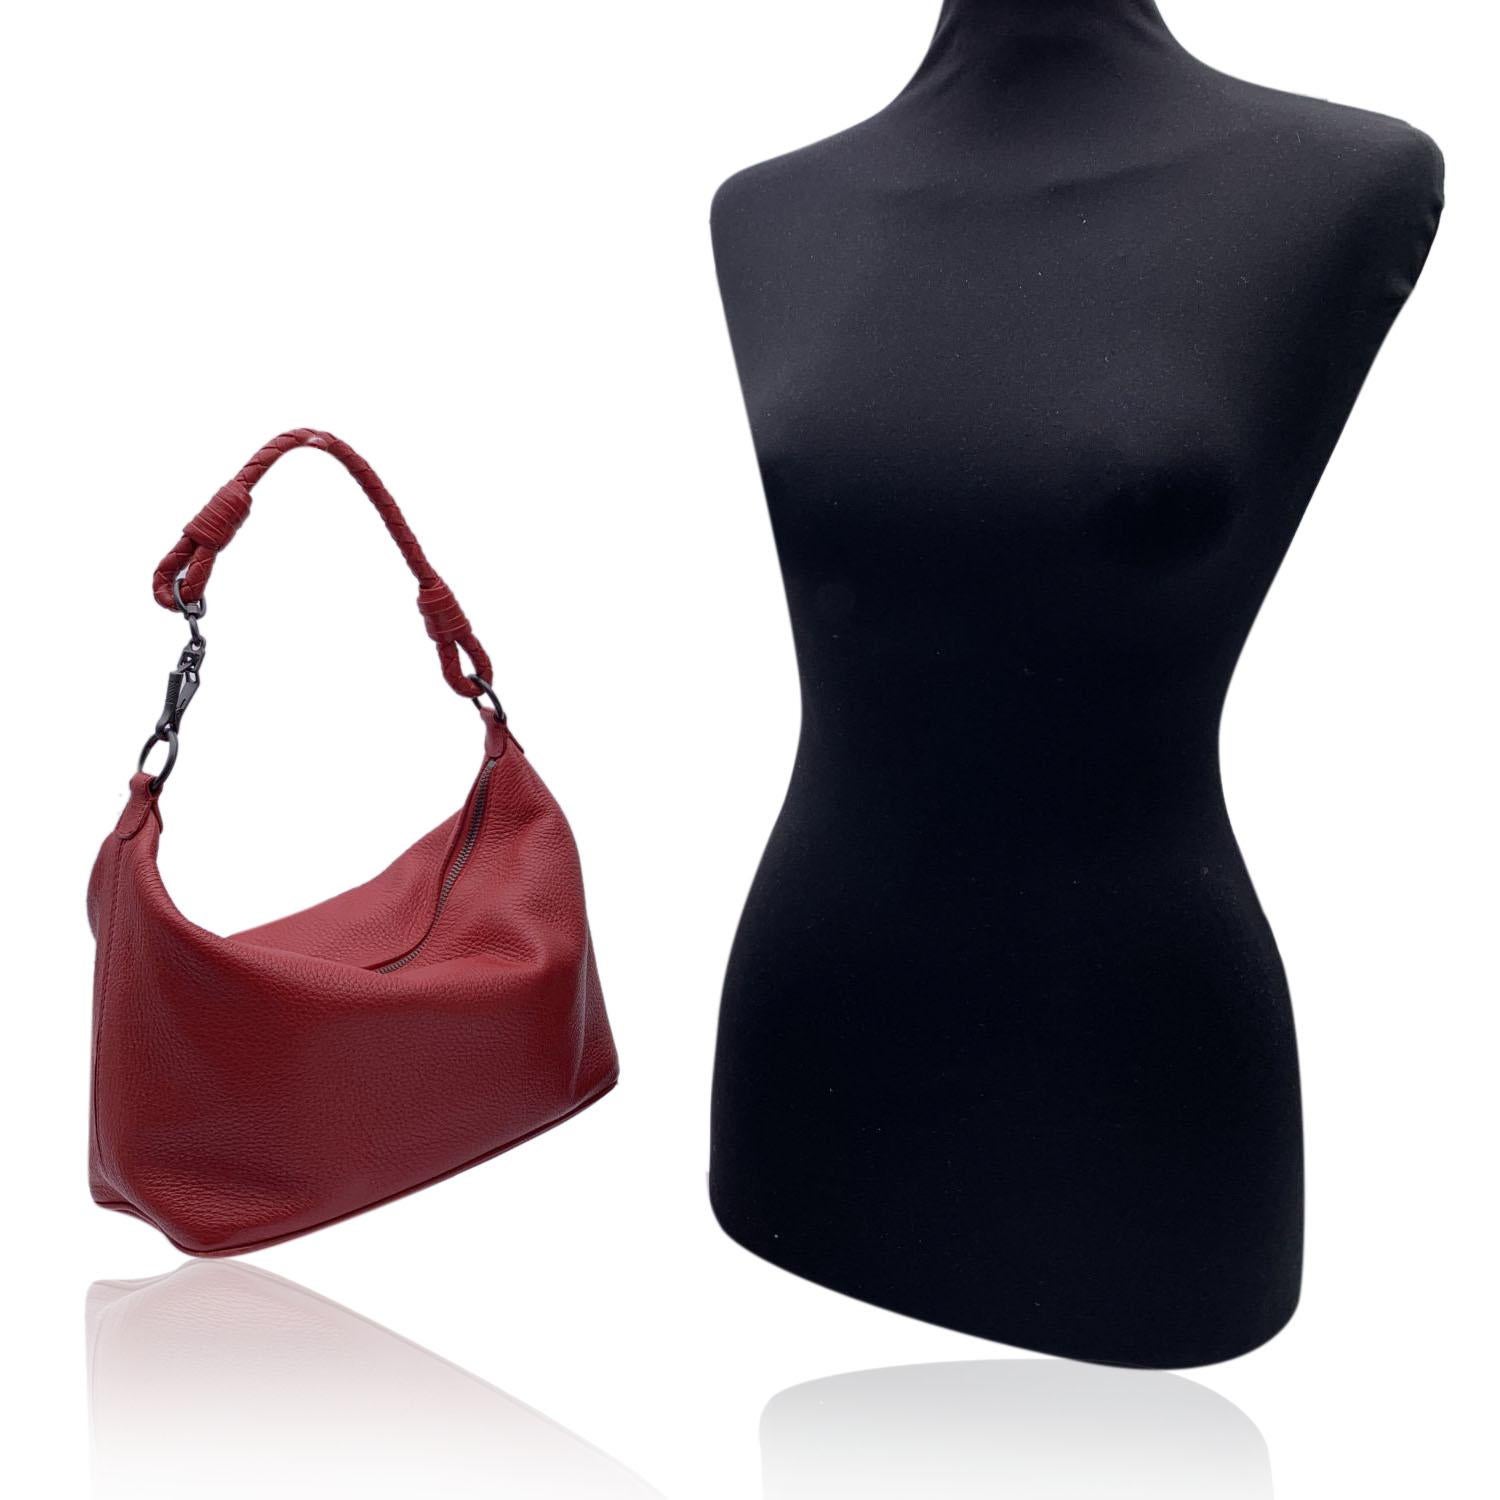 Bottega Veneta Hobo Shoulder Bag in red leather. Soft, boxy shape and a minimalistic appeal. Practical woven leather strap is detailed with a gunmetal-finish spring clip. Upper zipper closure. Velvety suede-lined interior. 'Bottega Veneta - made in